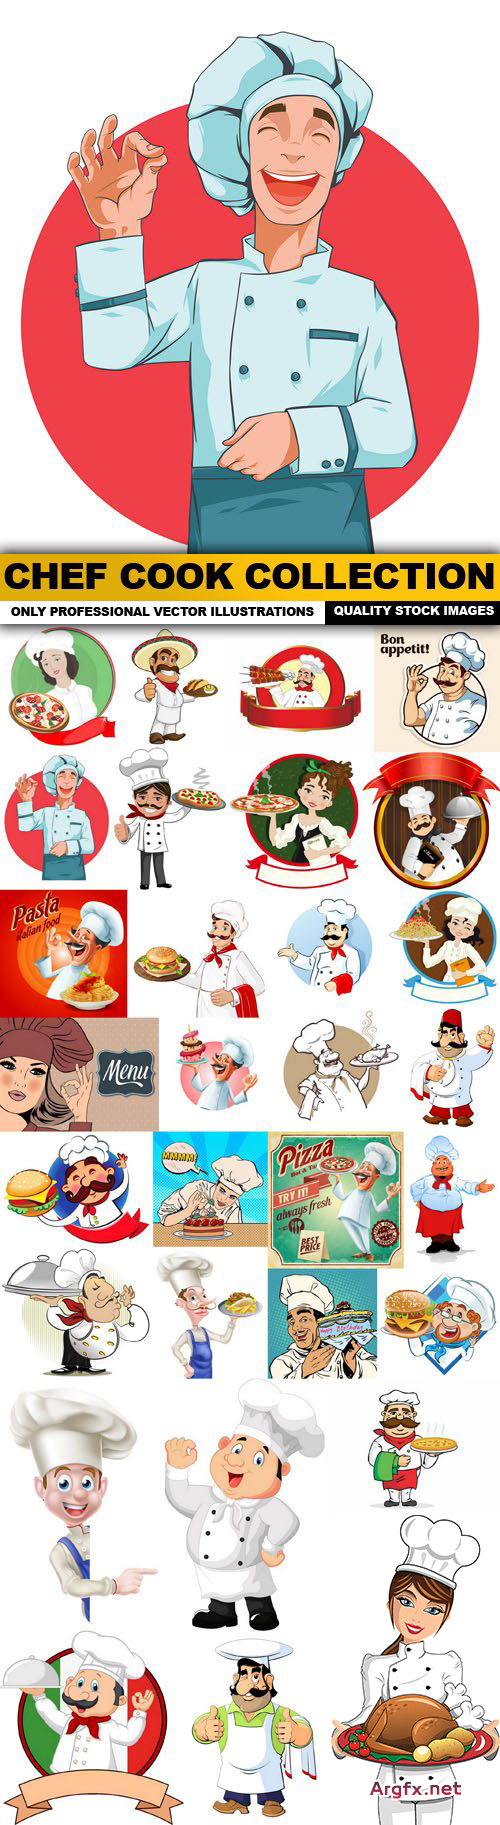 Chef Cook Collection - 30 Vector